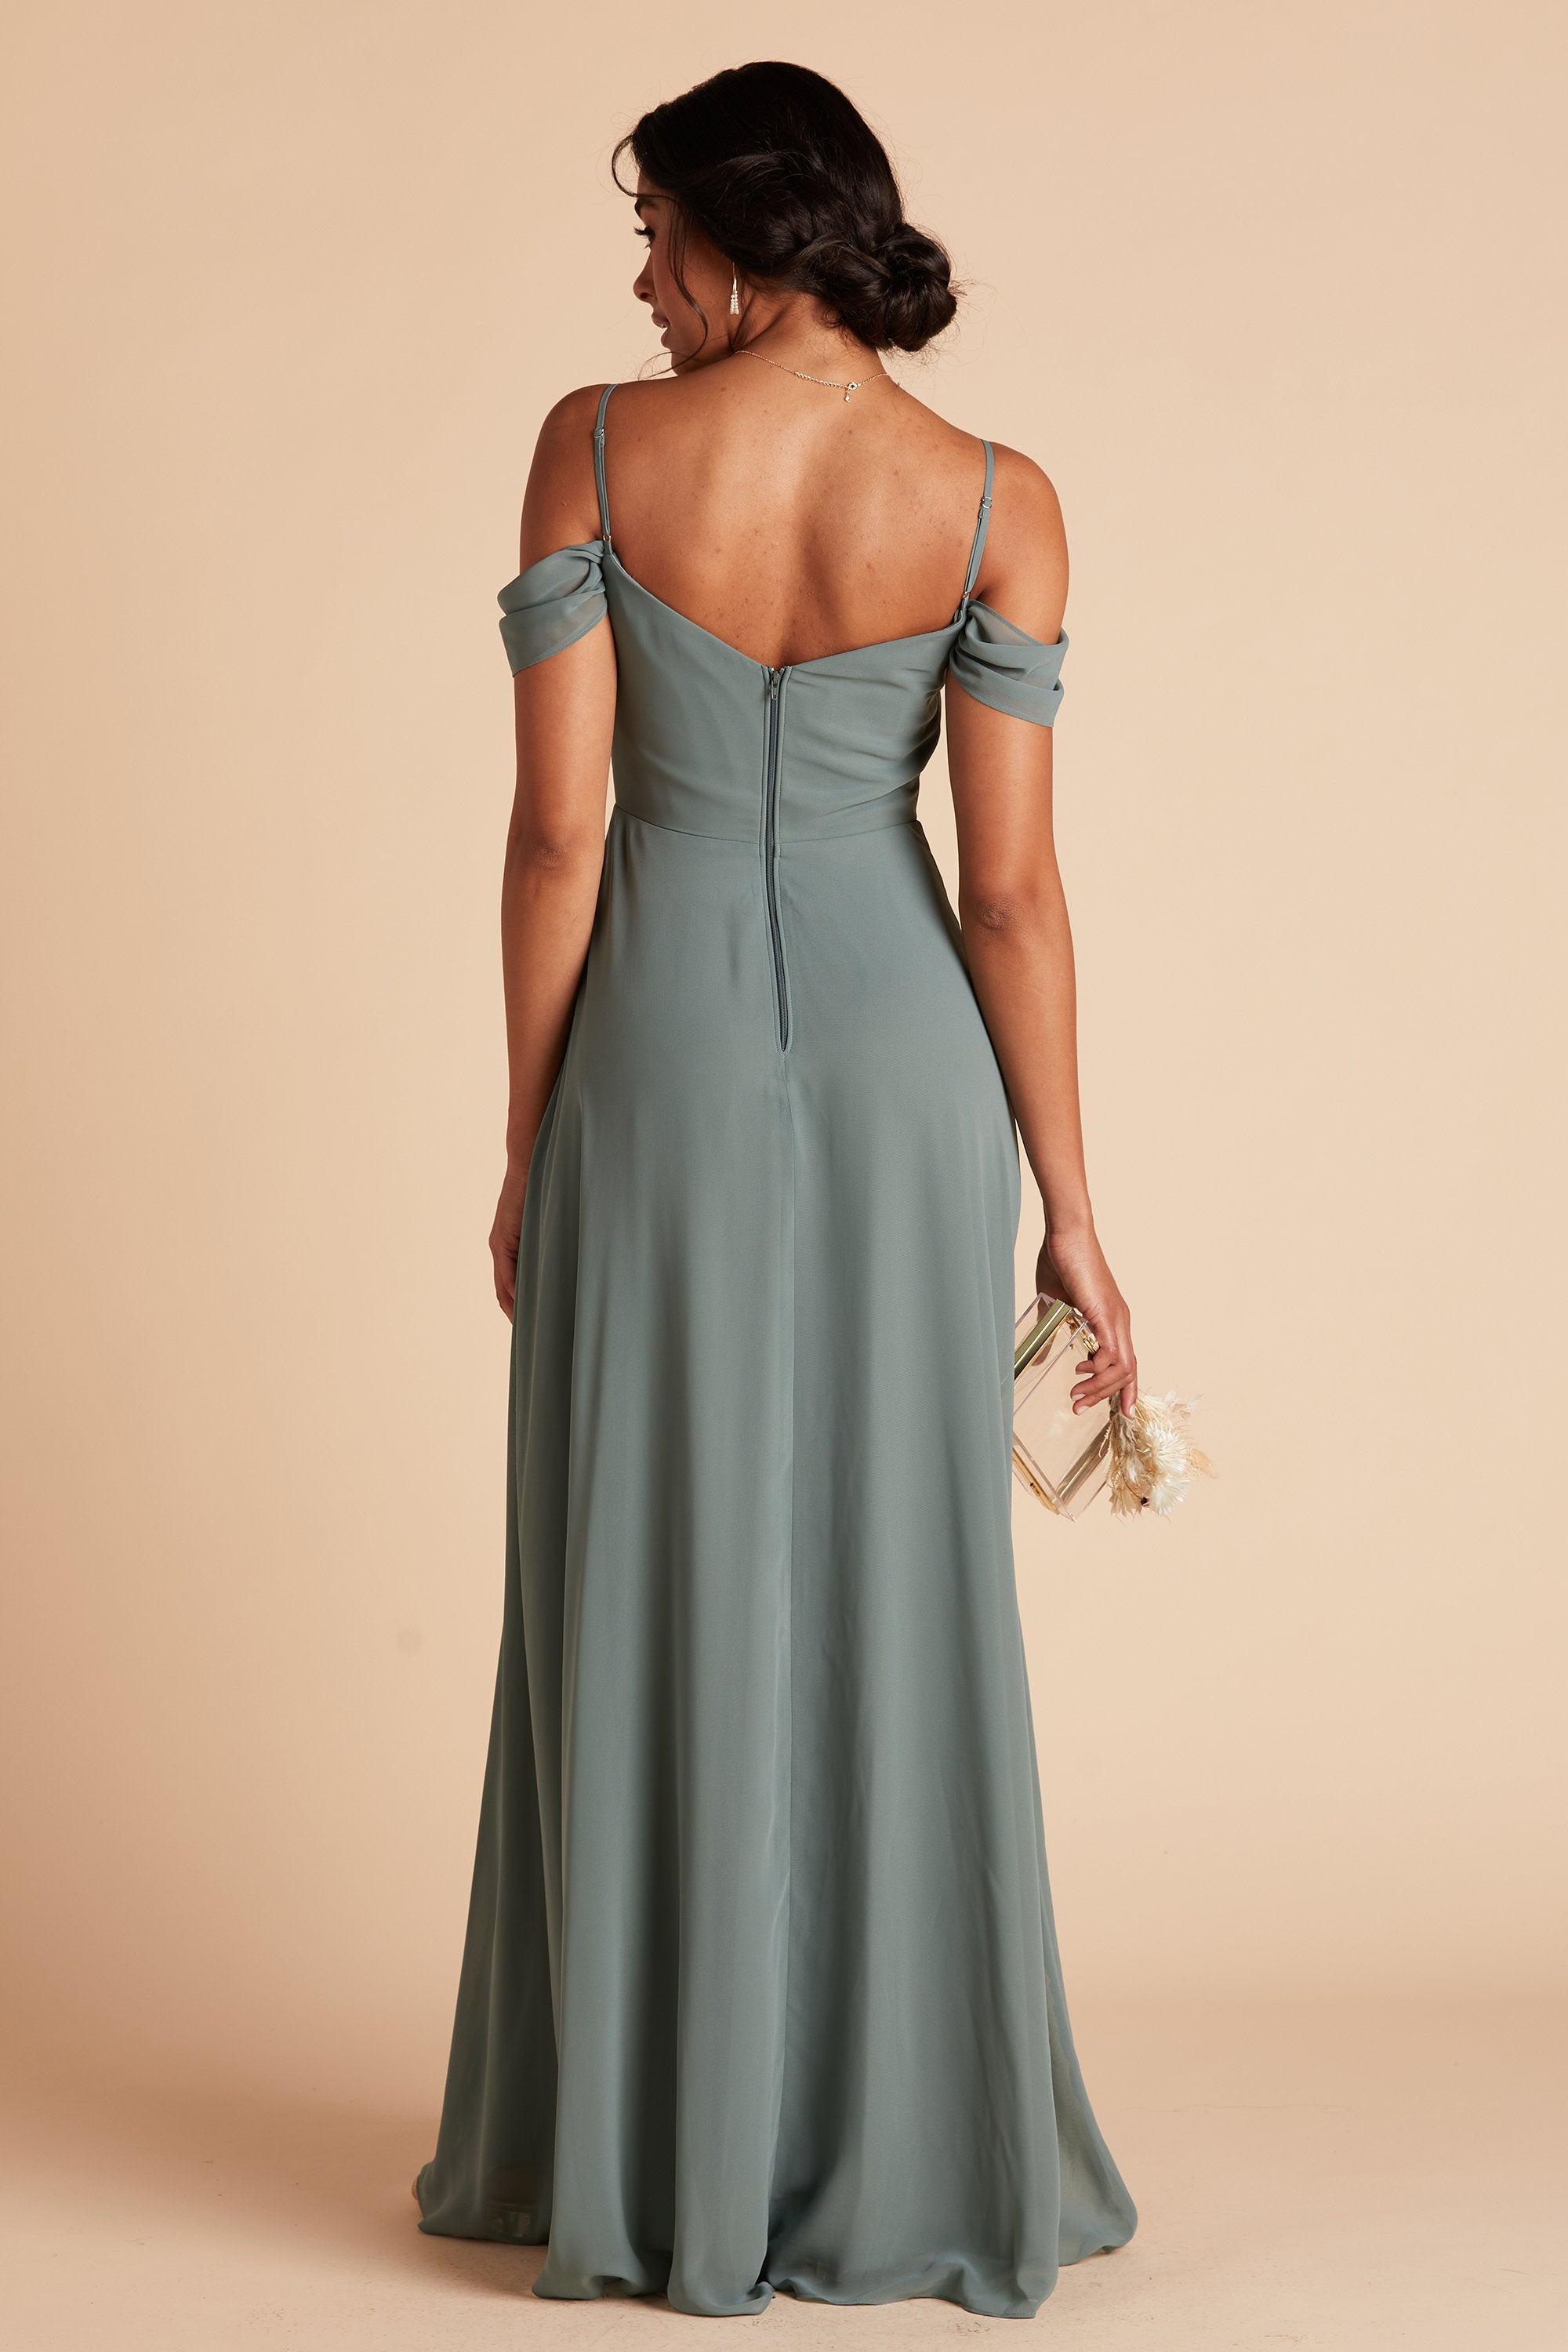 Devin convertible bridesmaids dress in sea glass green chiffon by Birdy Grey, back view